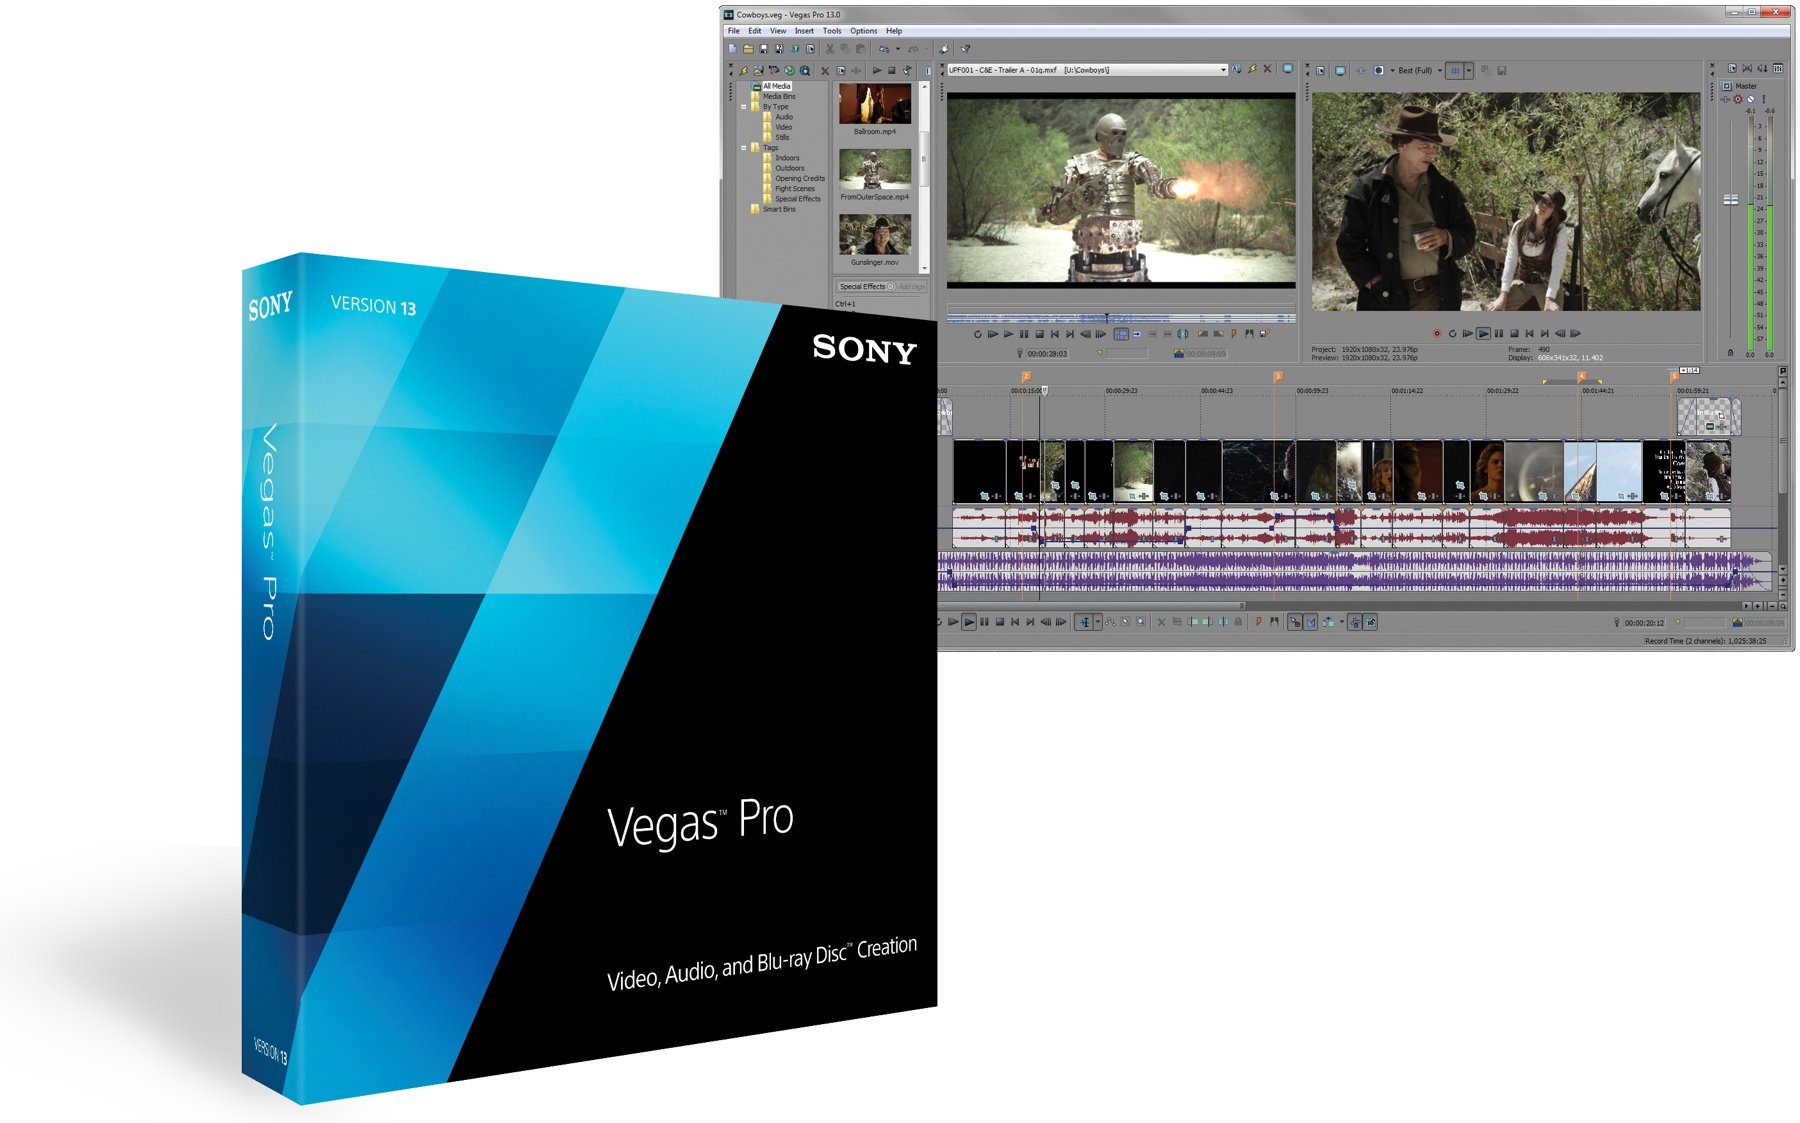 sony vegas pro 13.0 slow frame rate while editing